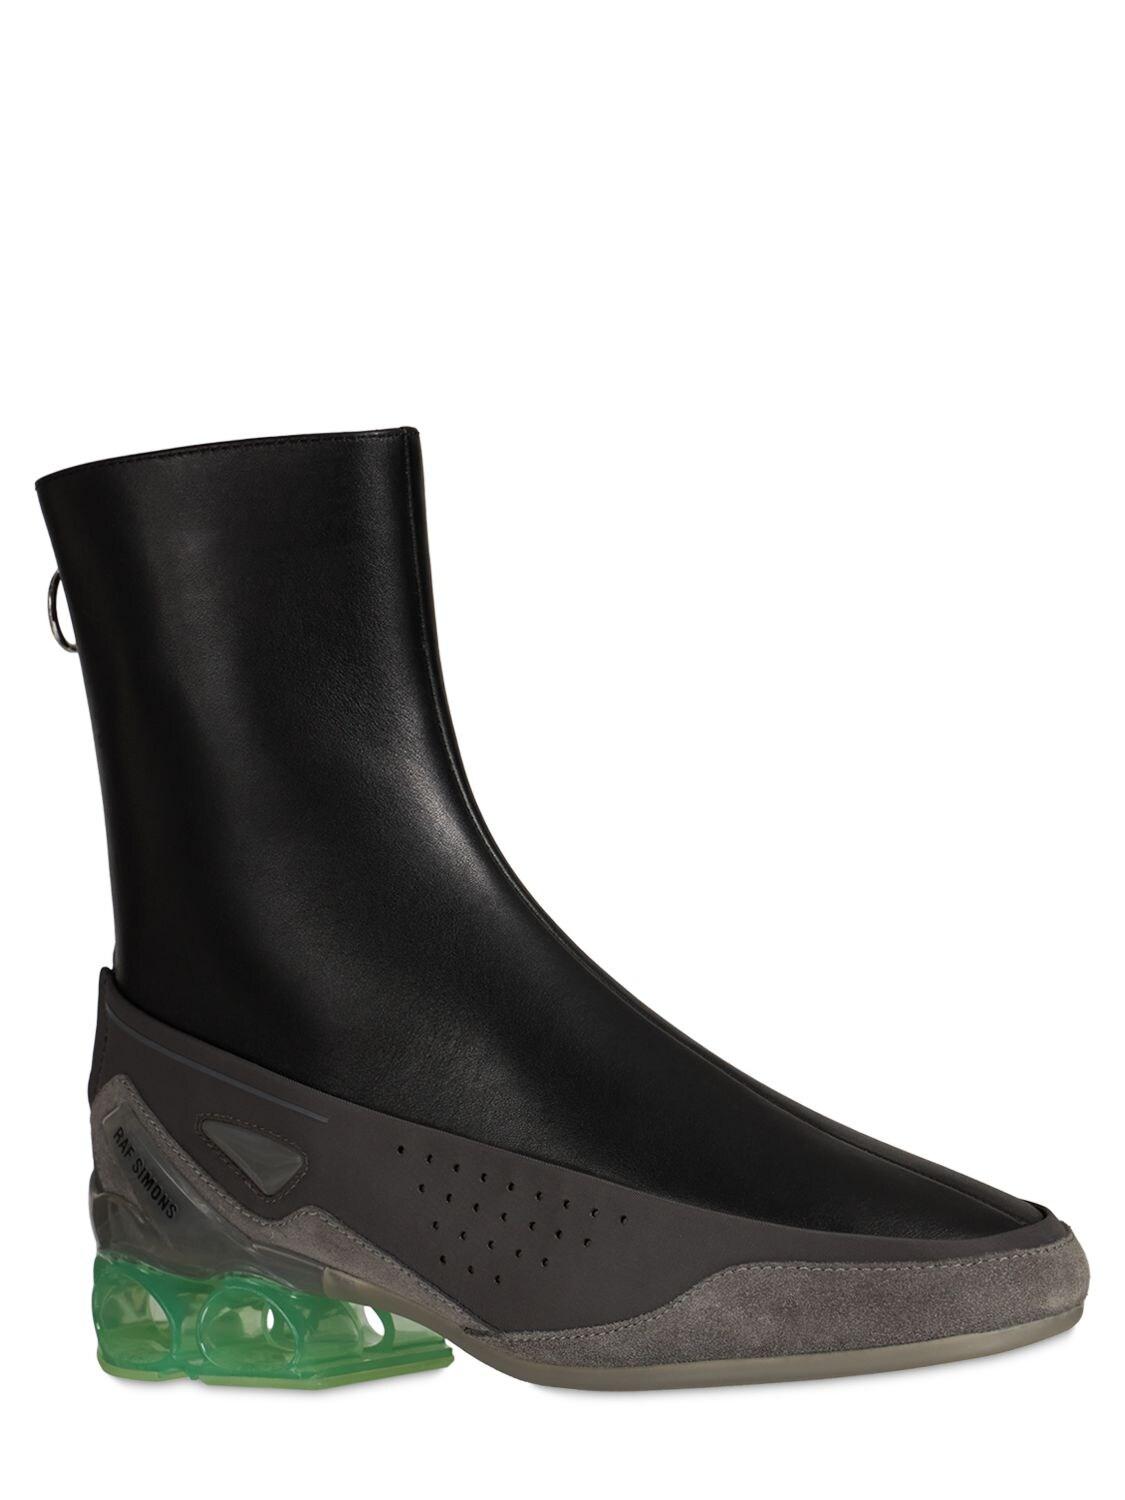 Raf Simons Cycloid-4 High-top Leather Boots for Men - Lyst